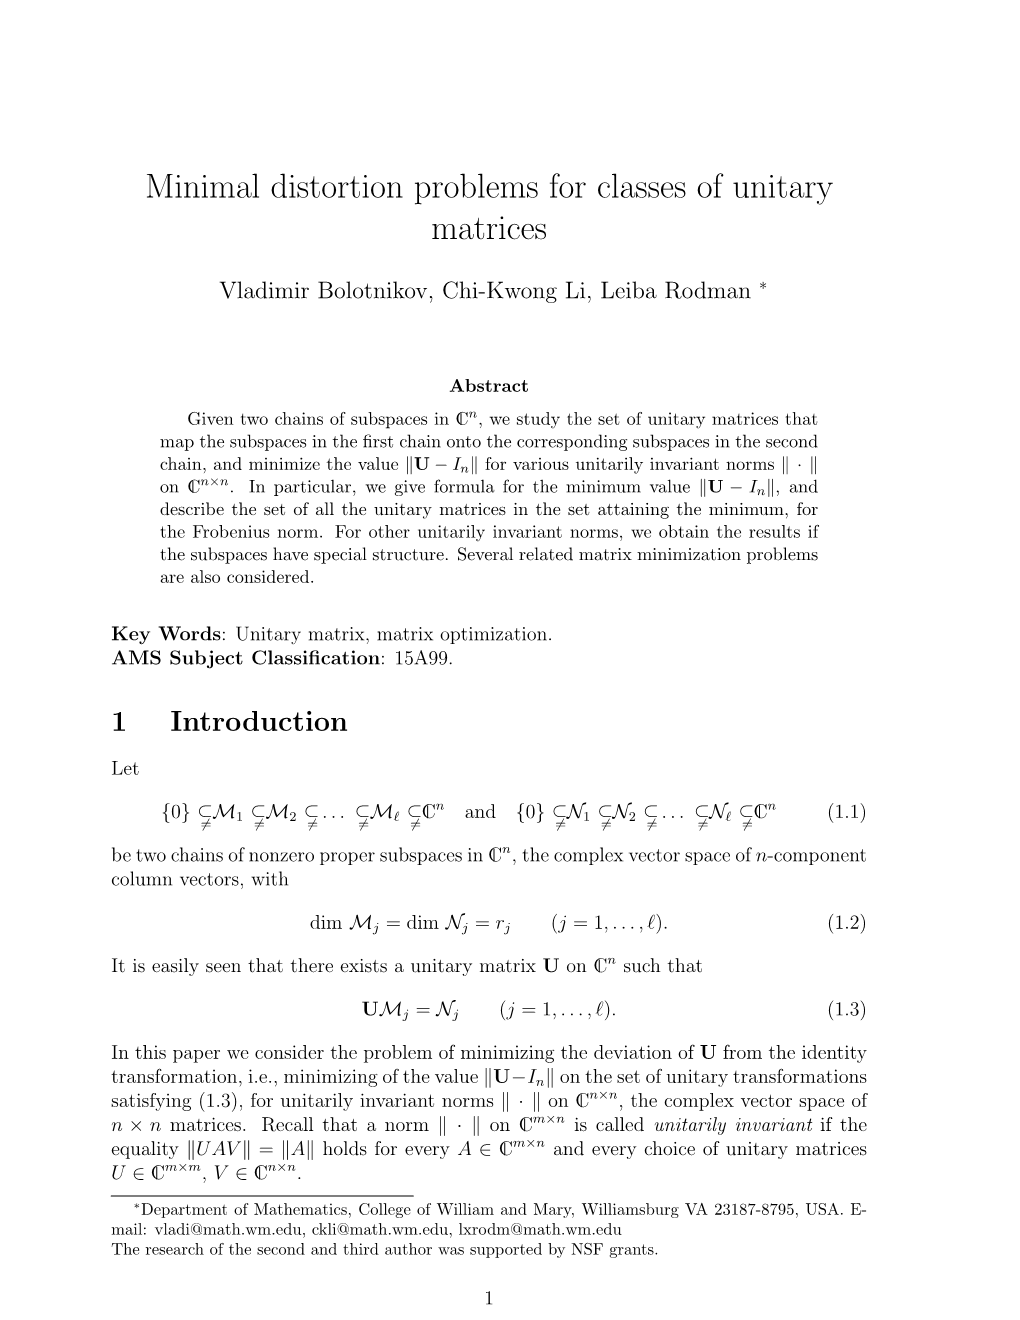 Minimal Distortion Problems for Classes of Unitary Matrices